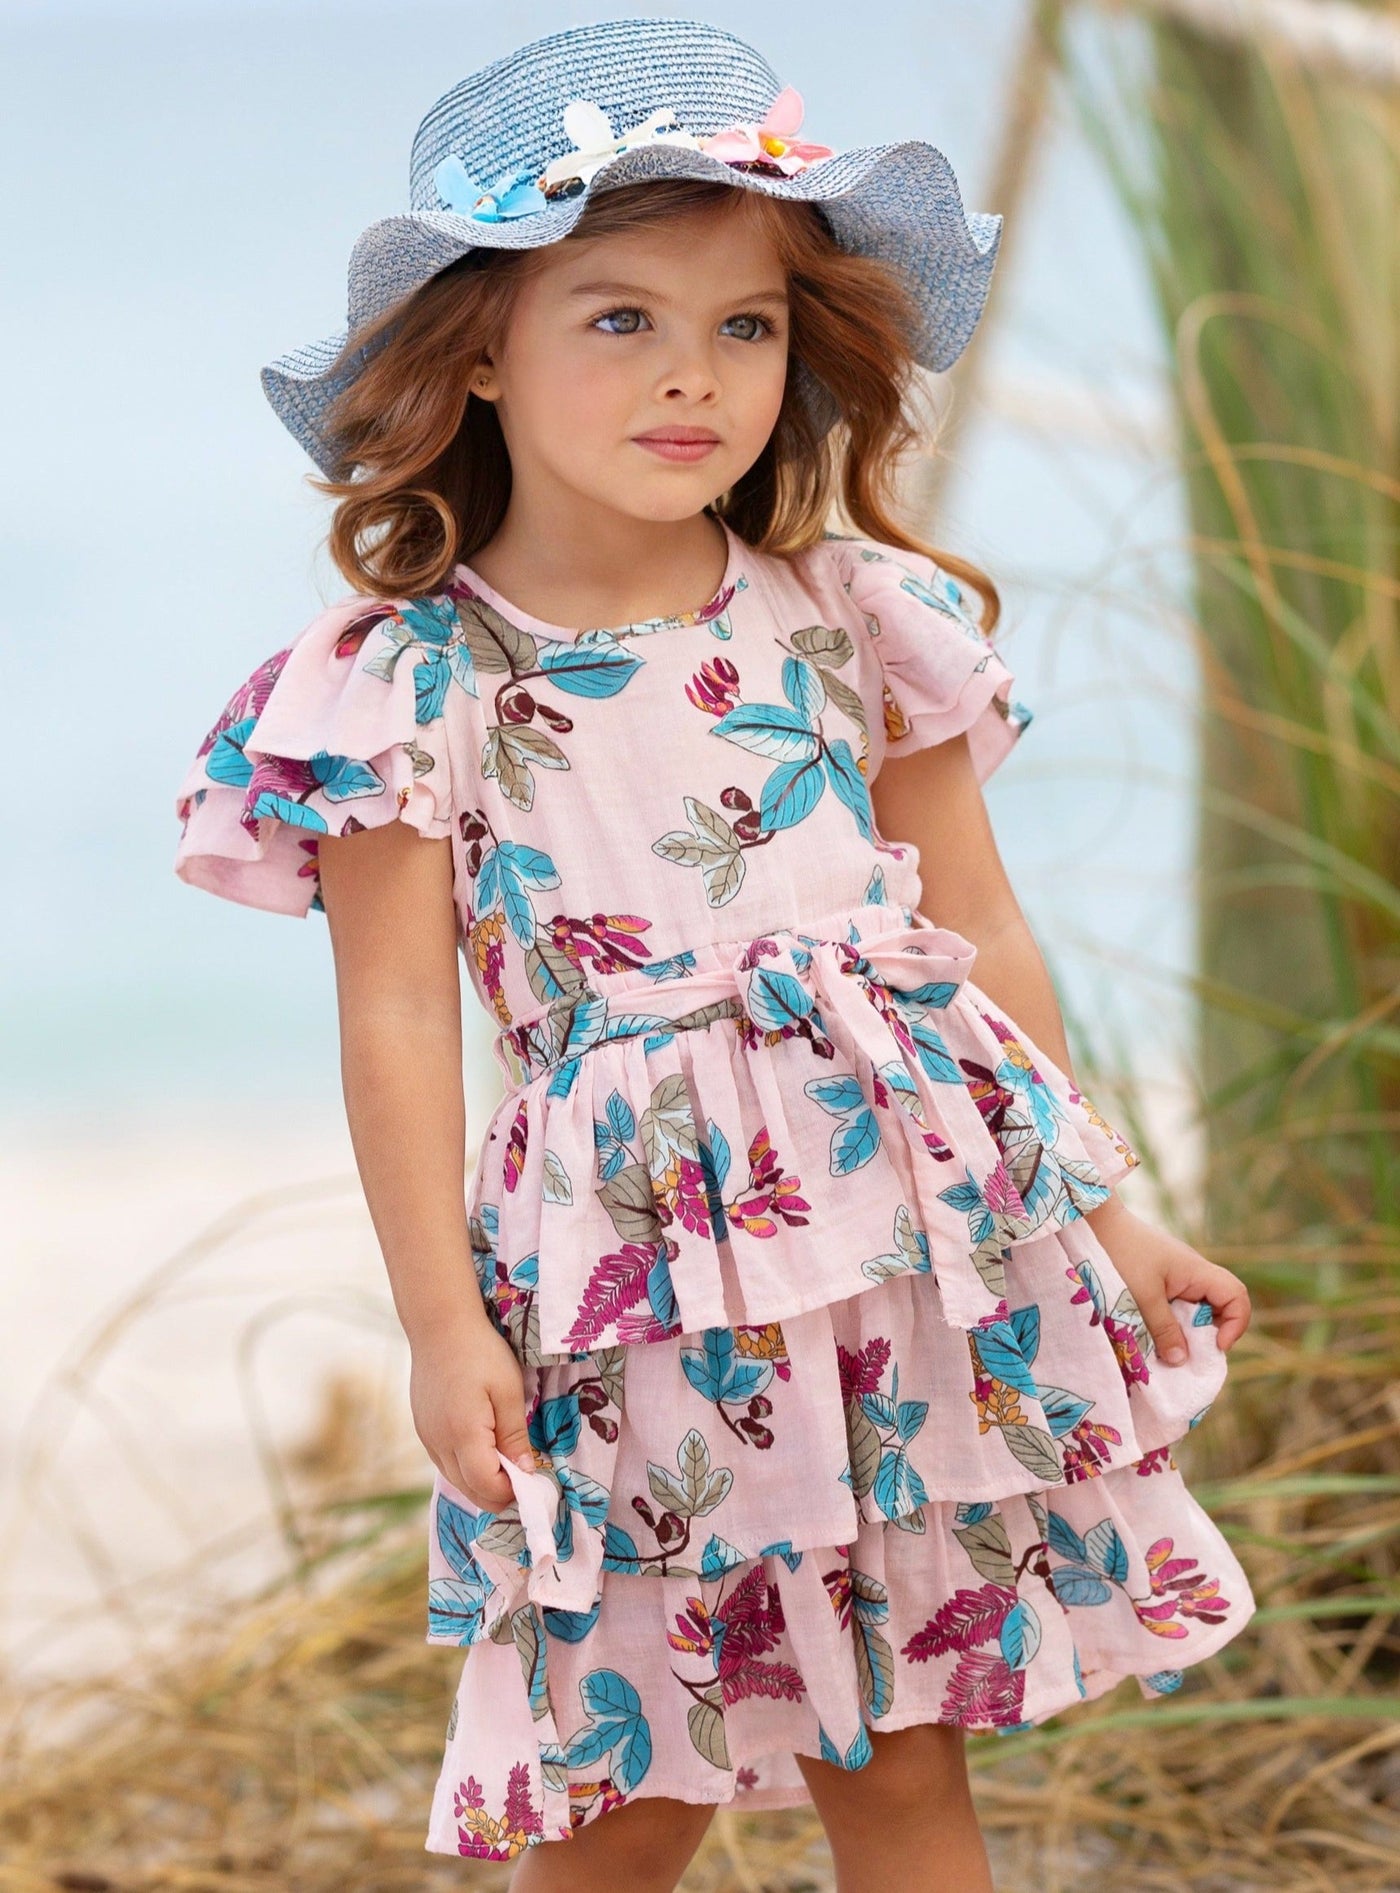 Mia Belle Girls Floral Tiered Ruffle Dress | Girls Spring Dresses